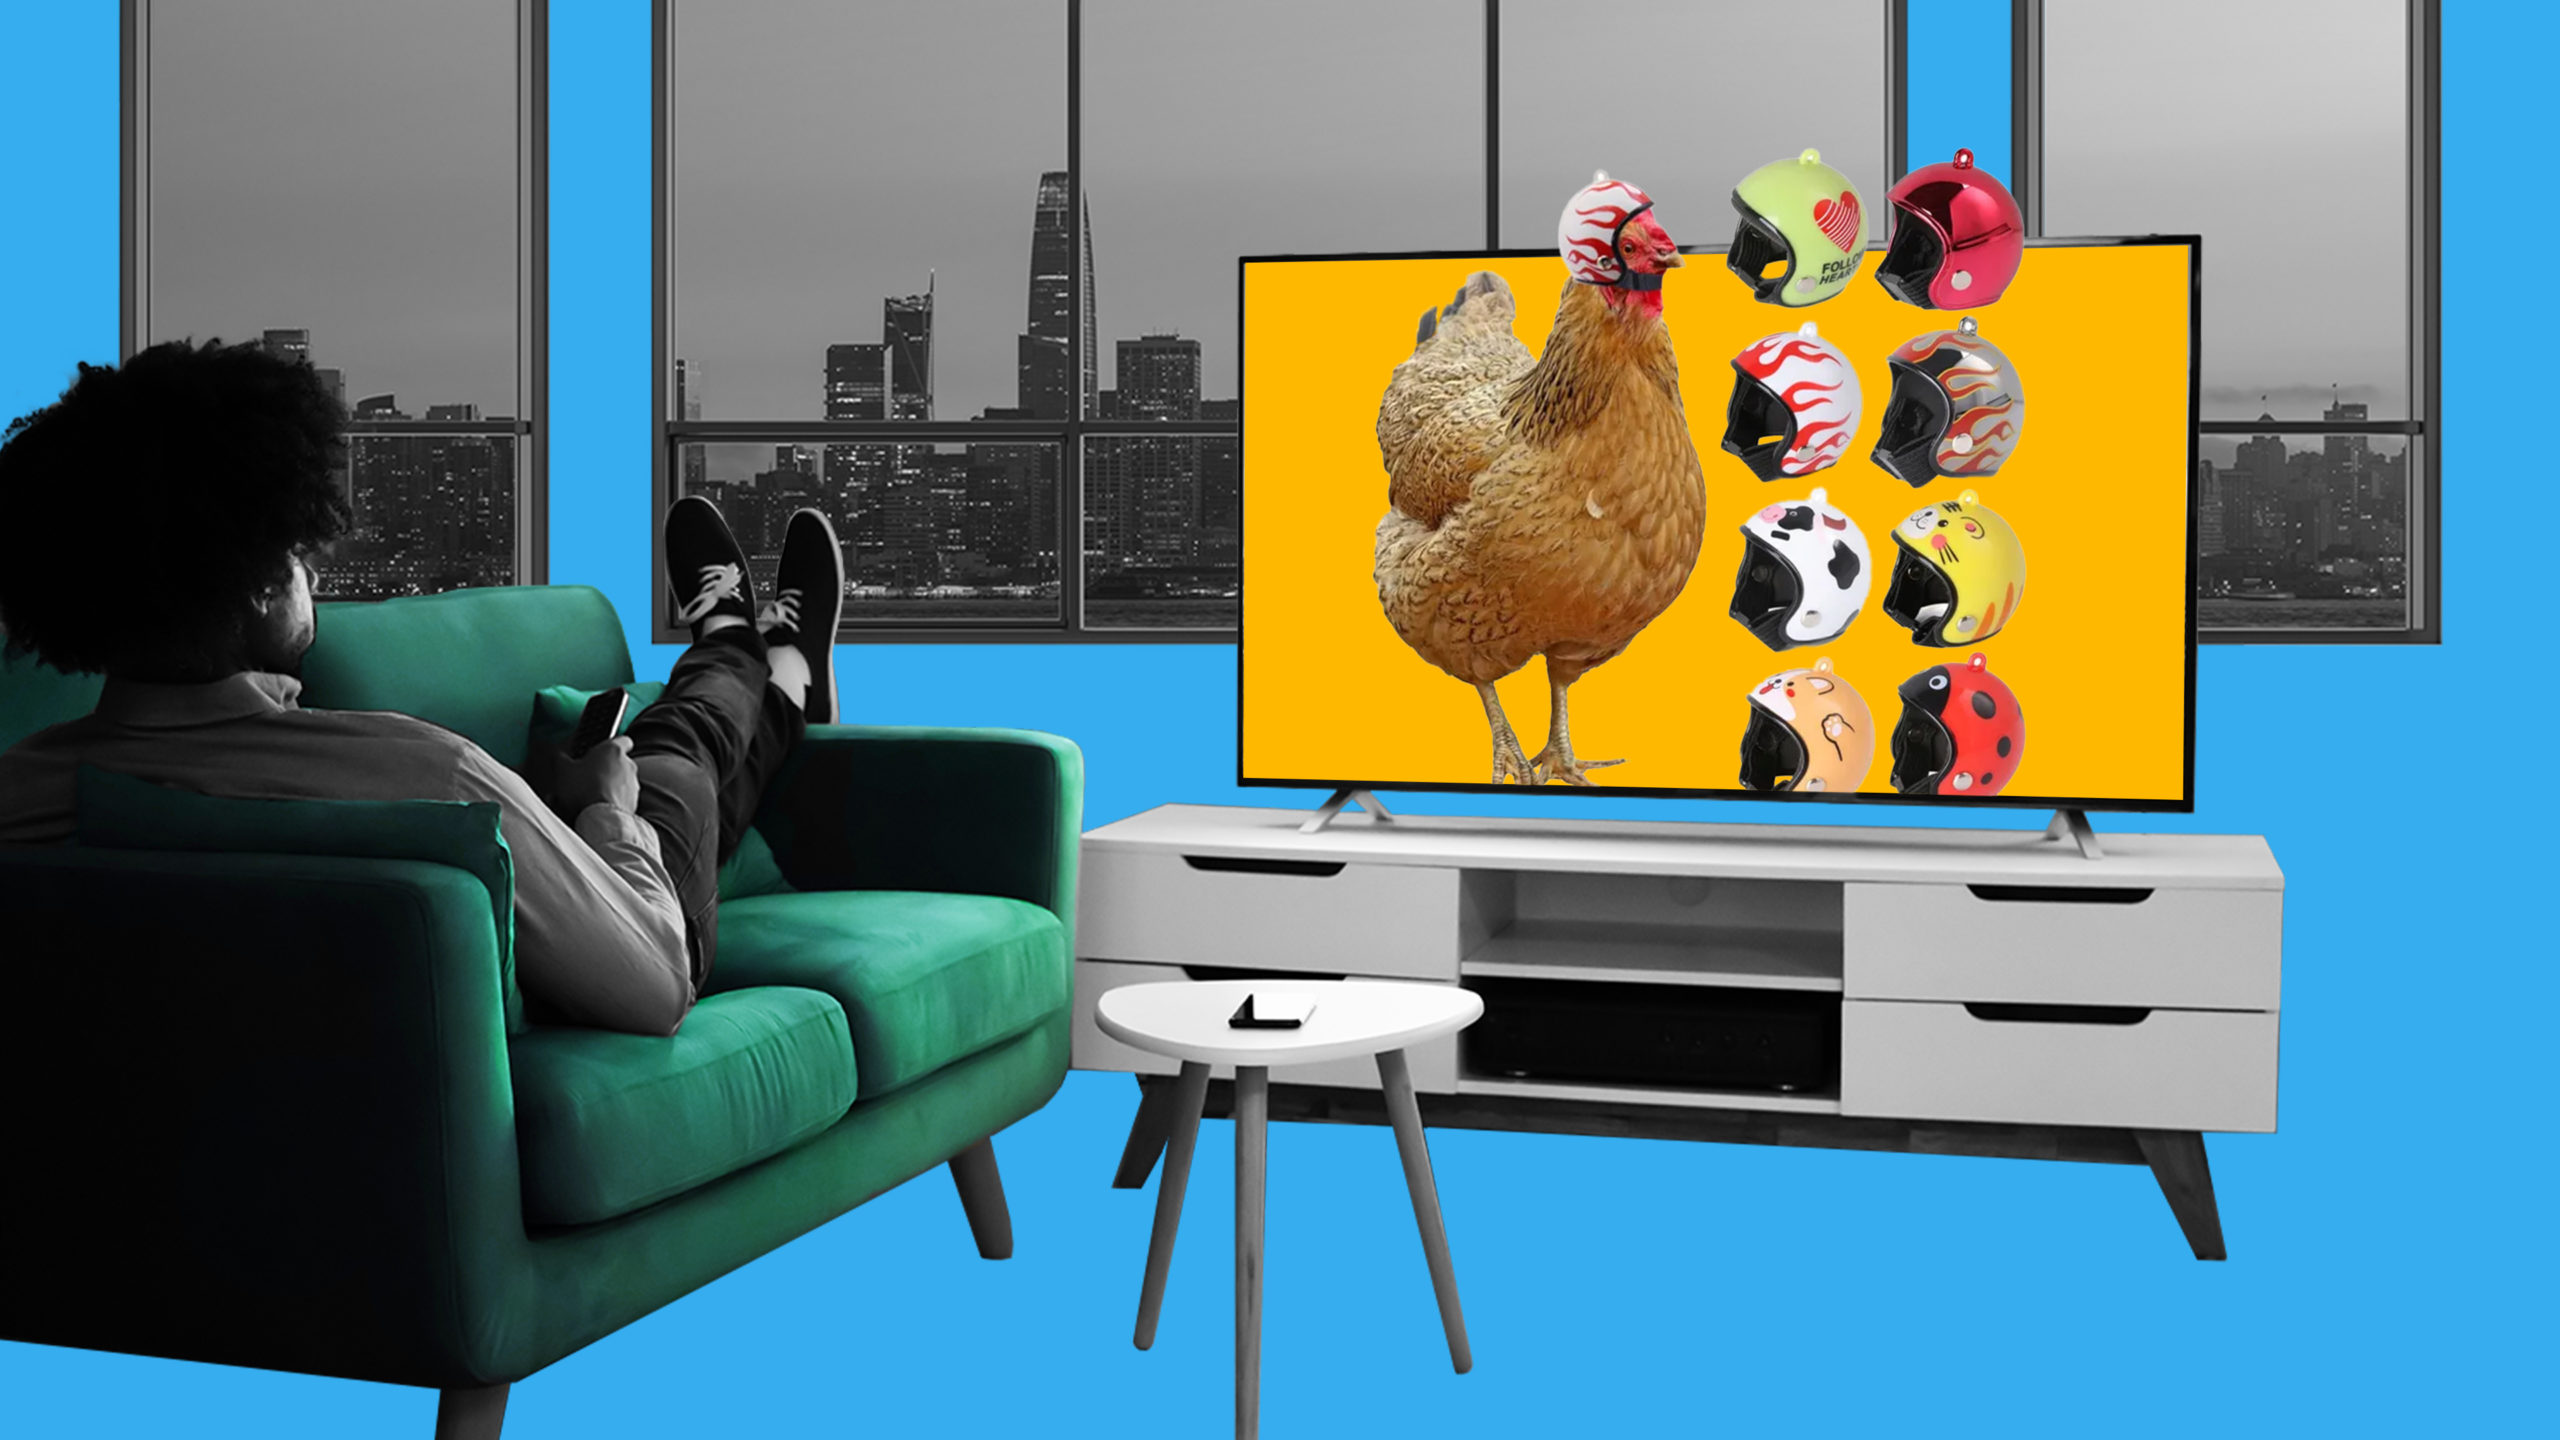 This image features someone sitting on their couch, watching content on their TV screen. On the screen, there is an image of a chicken wearing a helmet, with other chicken helmet design options to the side. This image represents bad or irrelevant digital ads.